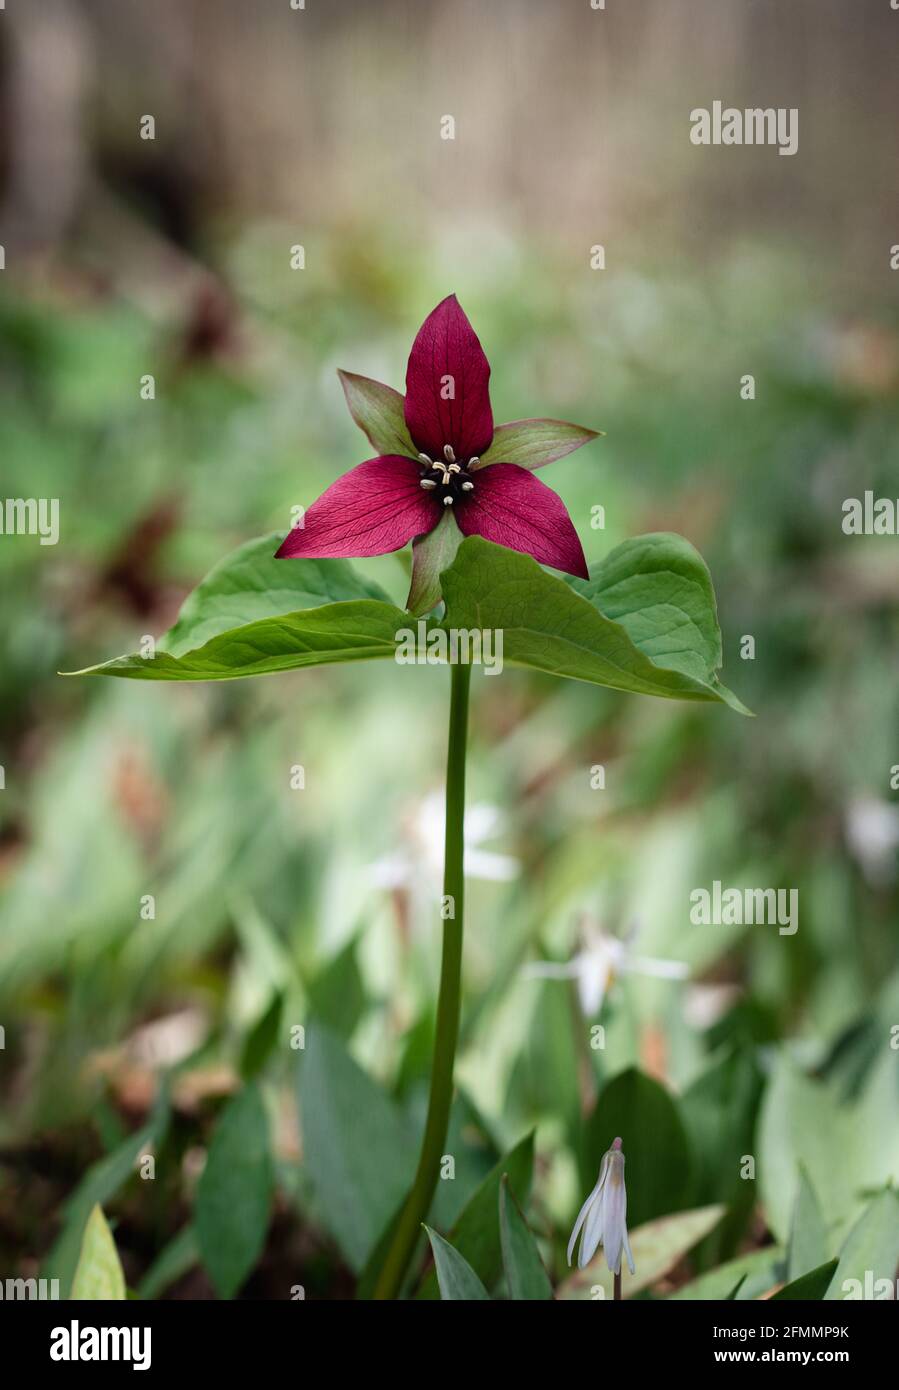 Red trillium flower blooming on the forest floor in Ontario, Canada Stock Photo